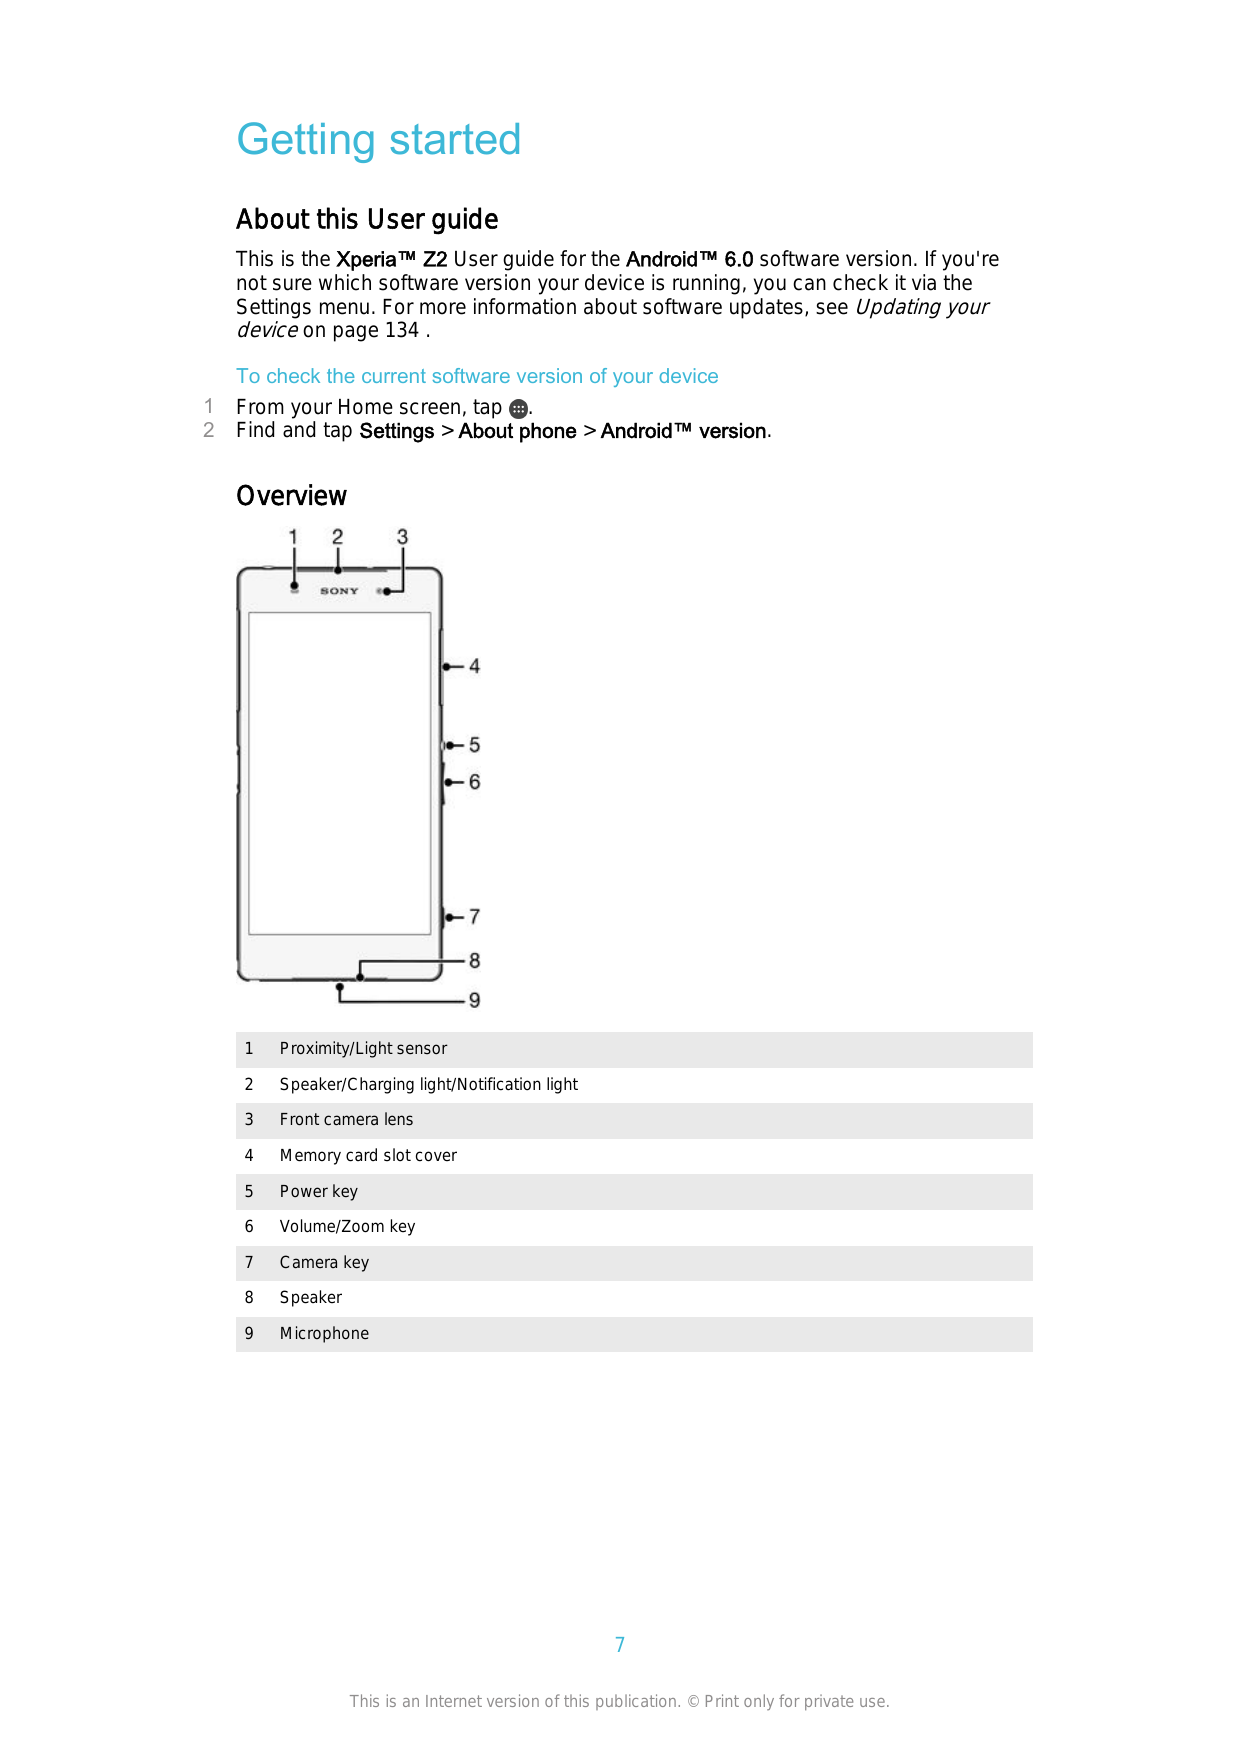 Getting startedAbout this User guideThis is the Xperia™ Z2 User guide for the Android™ 6.0 software version. If you'renot sure w